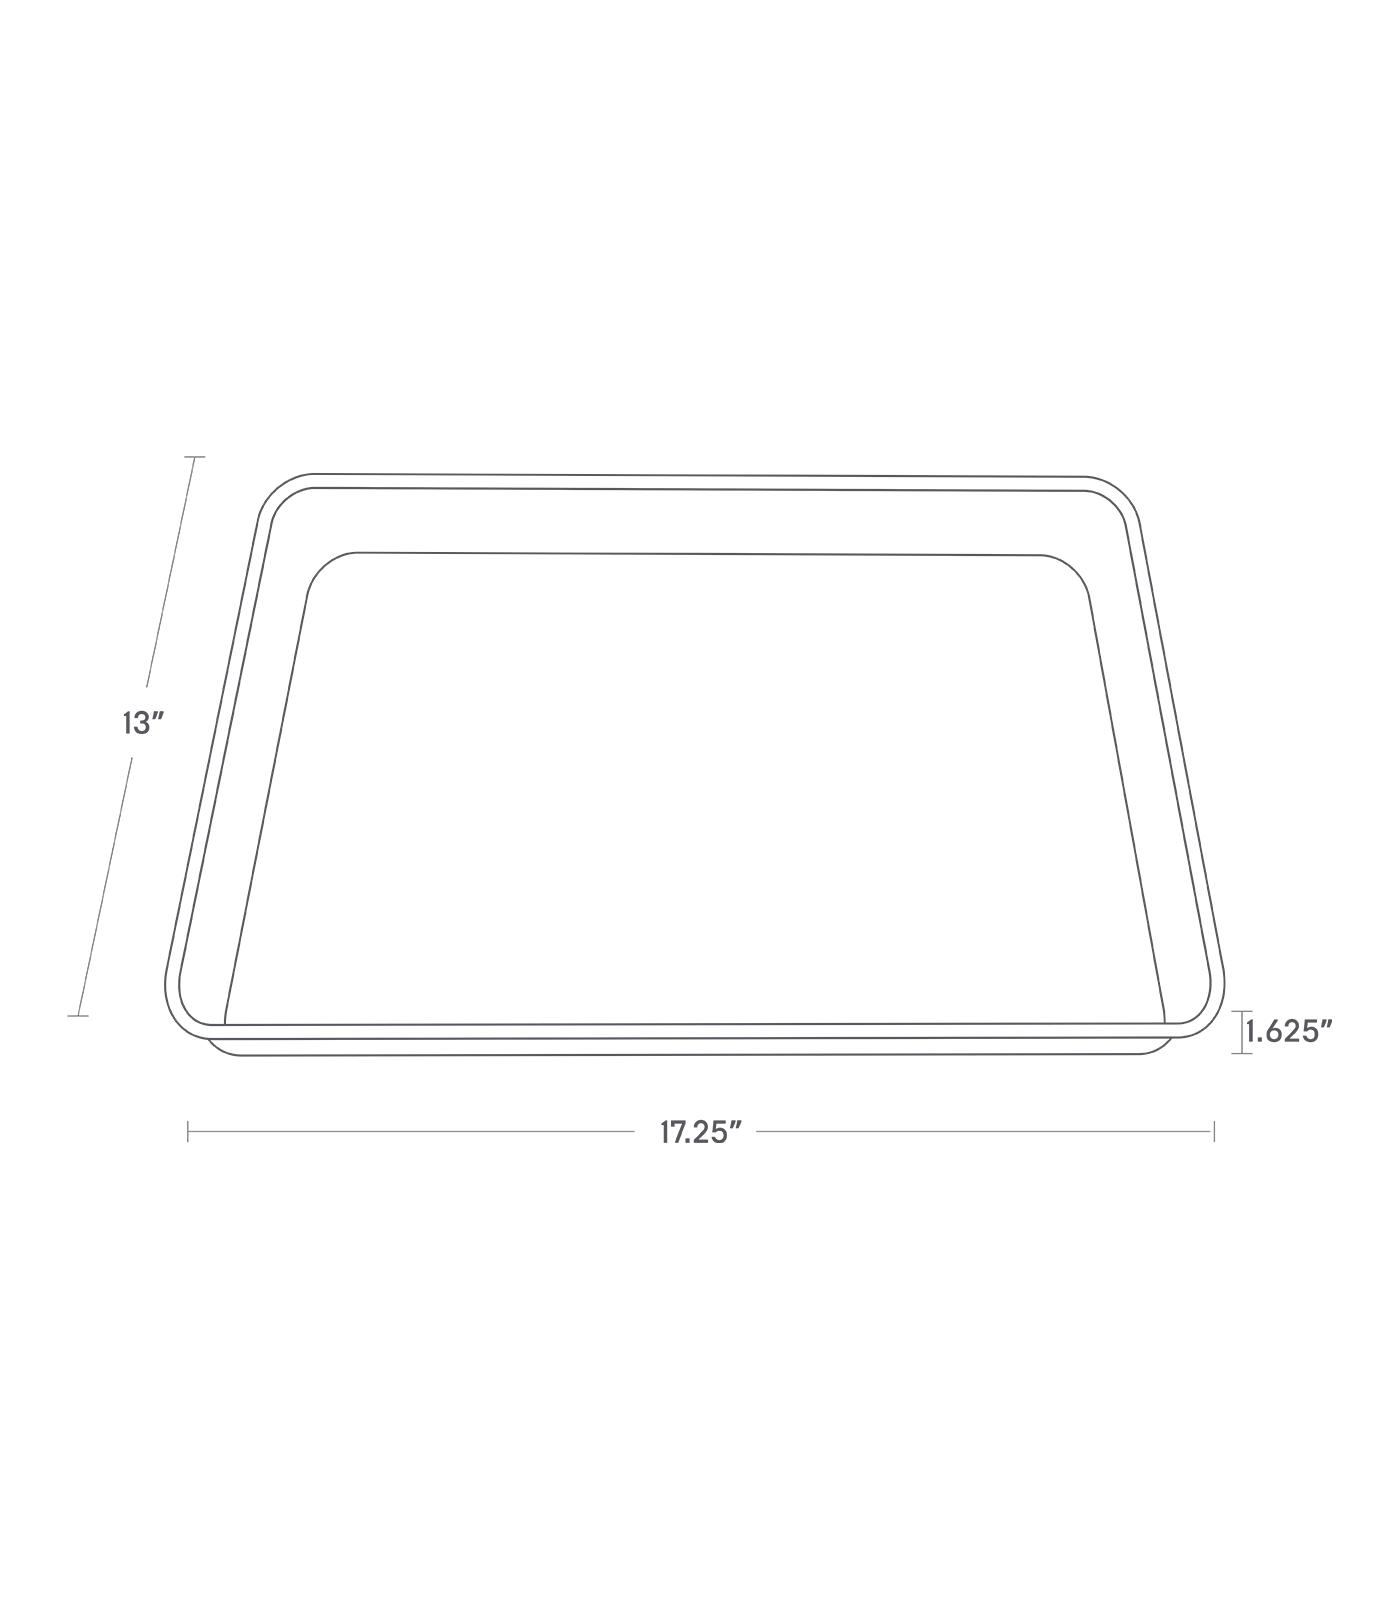 Dimension image for Replacement Drainer Tray for Dish Rack showing length of 17.25